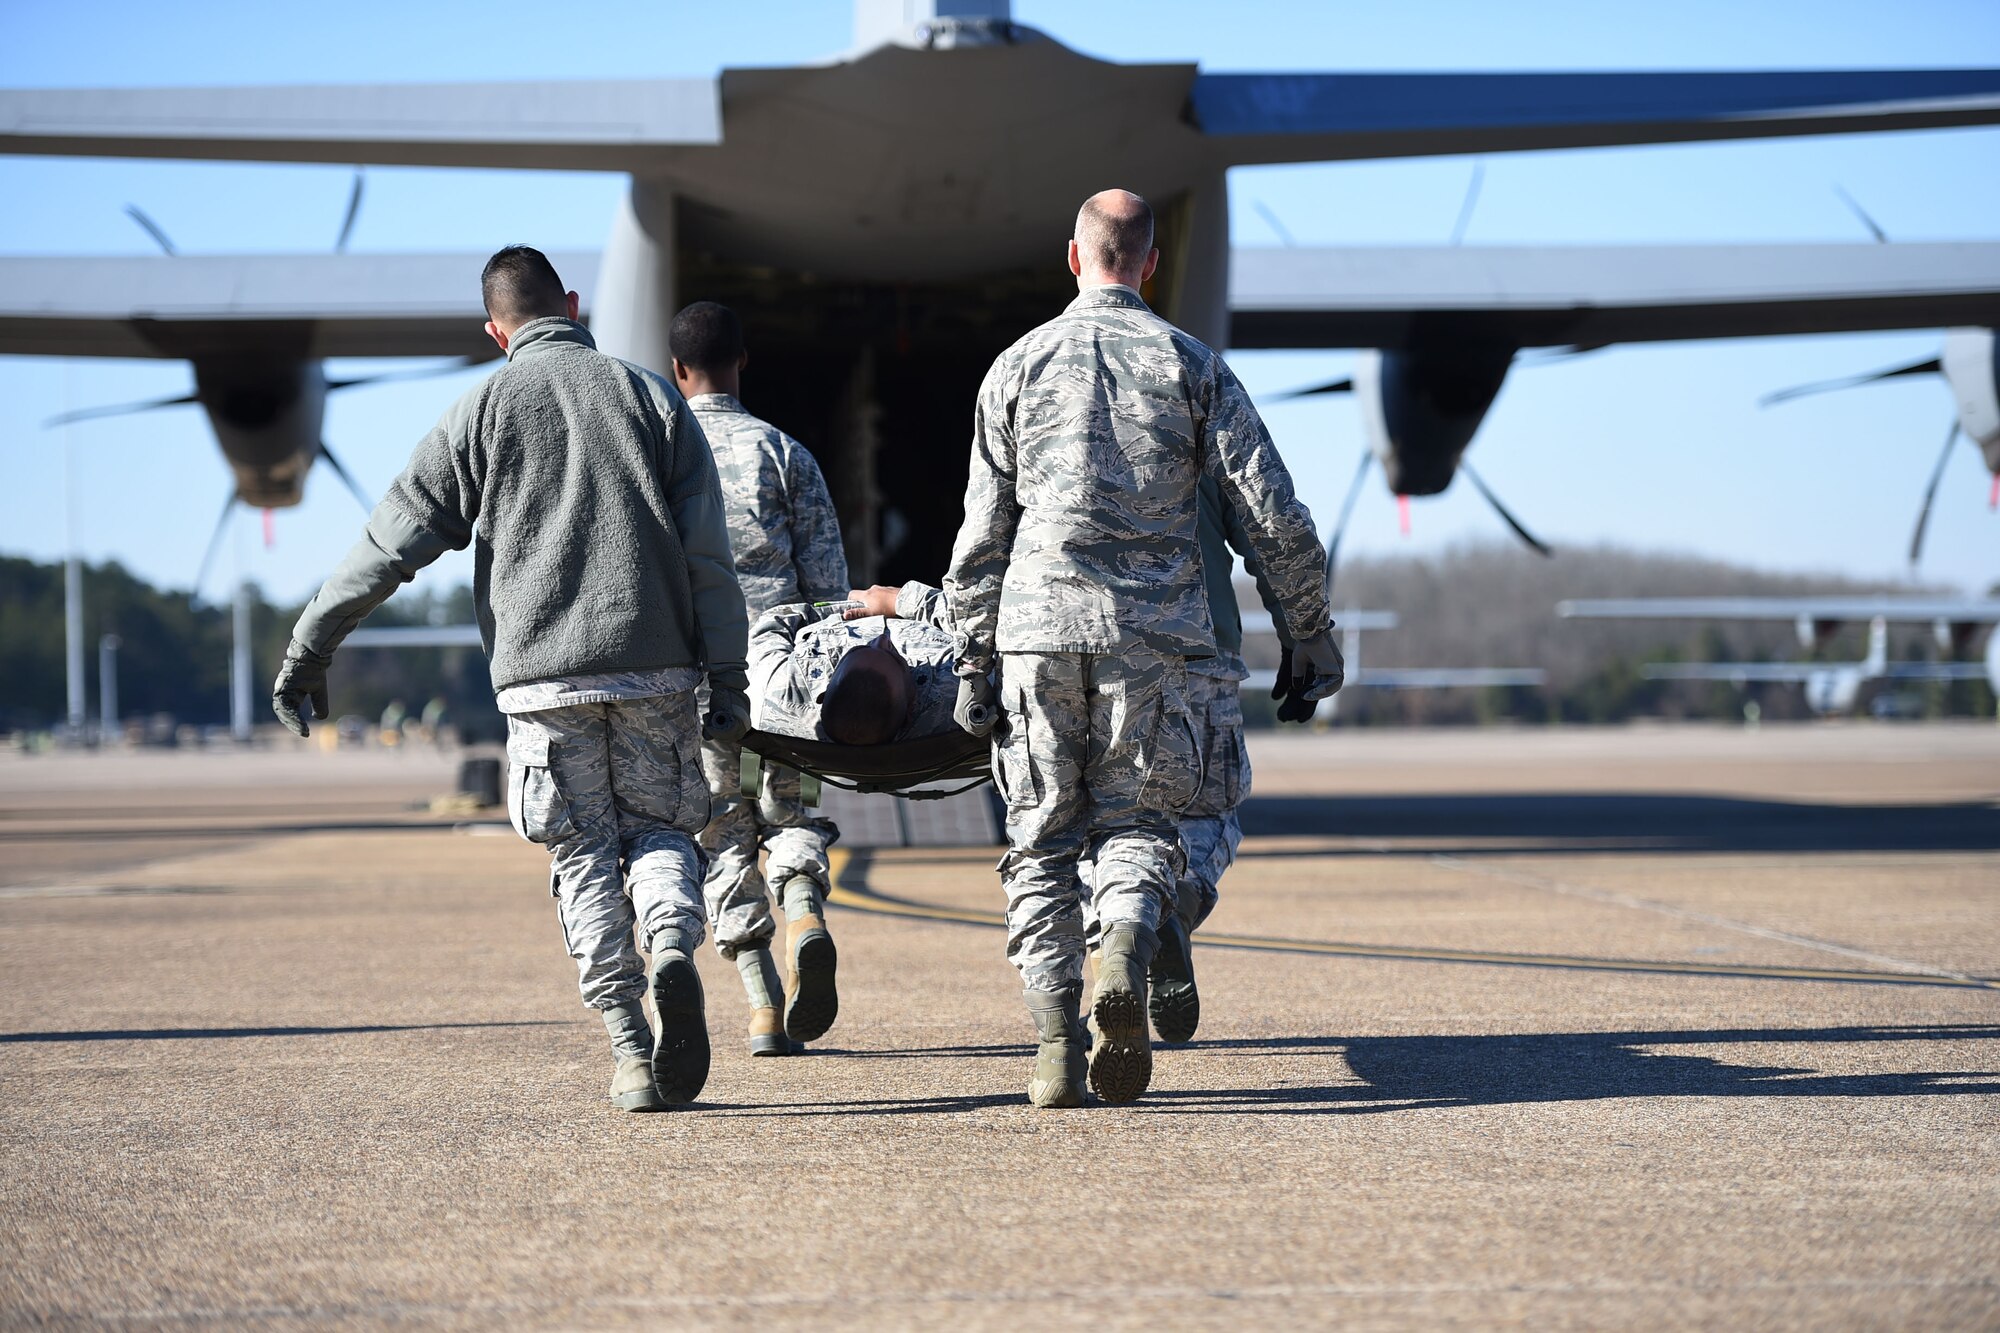 Airmen from the 19th Medical Group litter-carry a simulated patient onto a C-130J during an aeromedical evacuation training mission at Little Rock Air Force Base, Ark., Jan. 24, 2019. The training provided 19th MDG Airmen with hands-on training of airlift and aeromedical evacuation tactics, supporting rapid global mobility to respond to humanitarian or wartime requests to safeguard lives. (U.S. Air Force photo by Staff Sgt. Dana J. Cable)